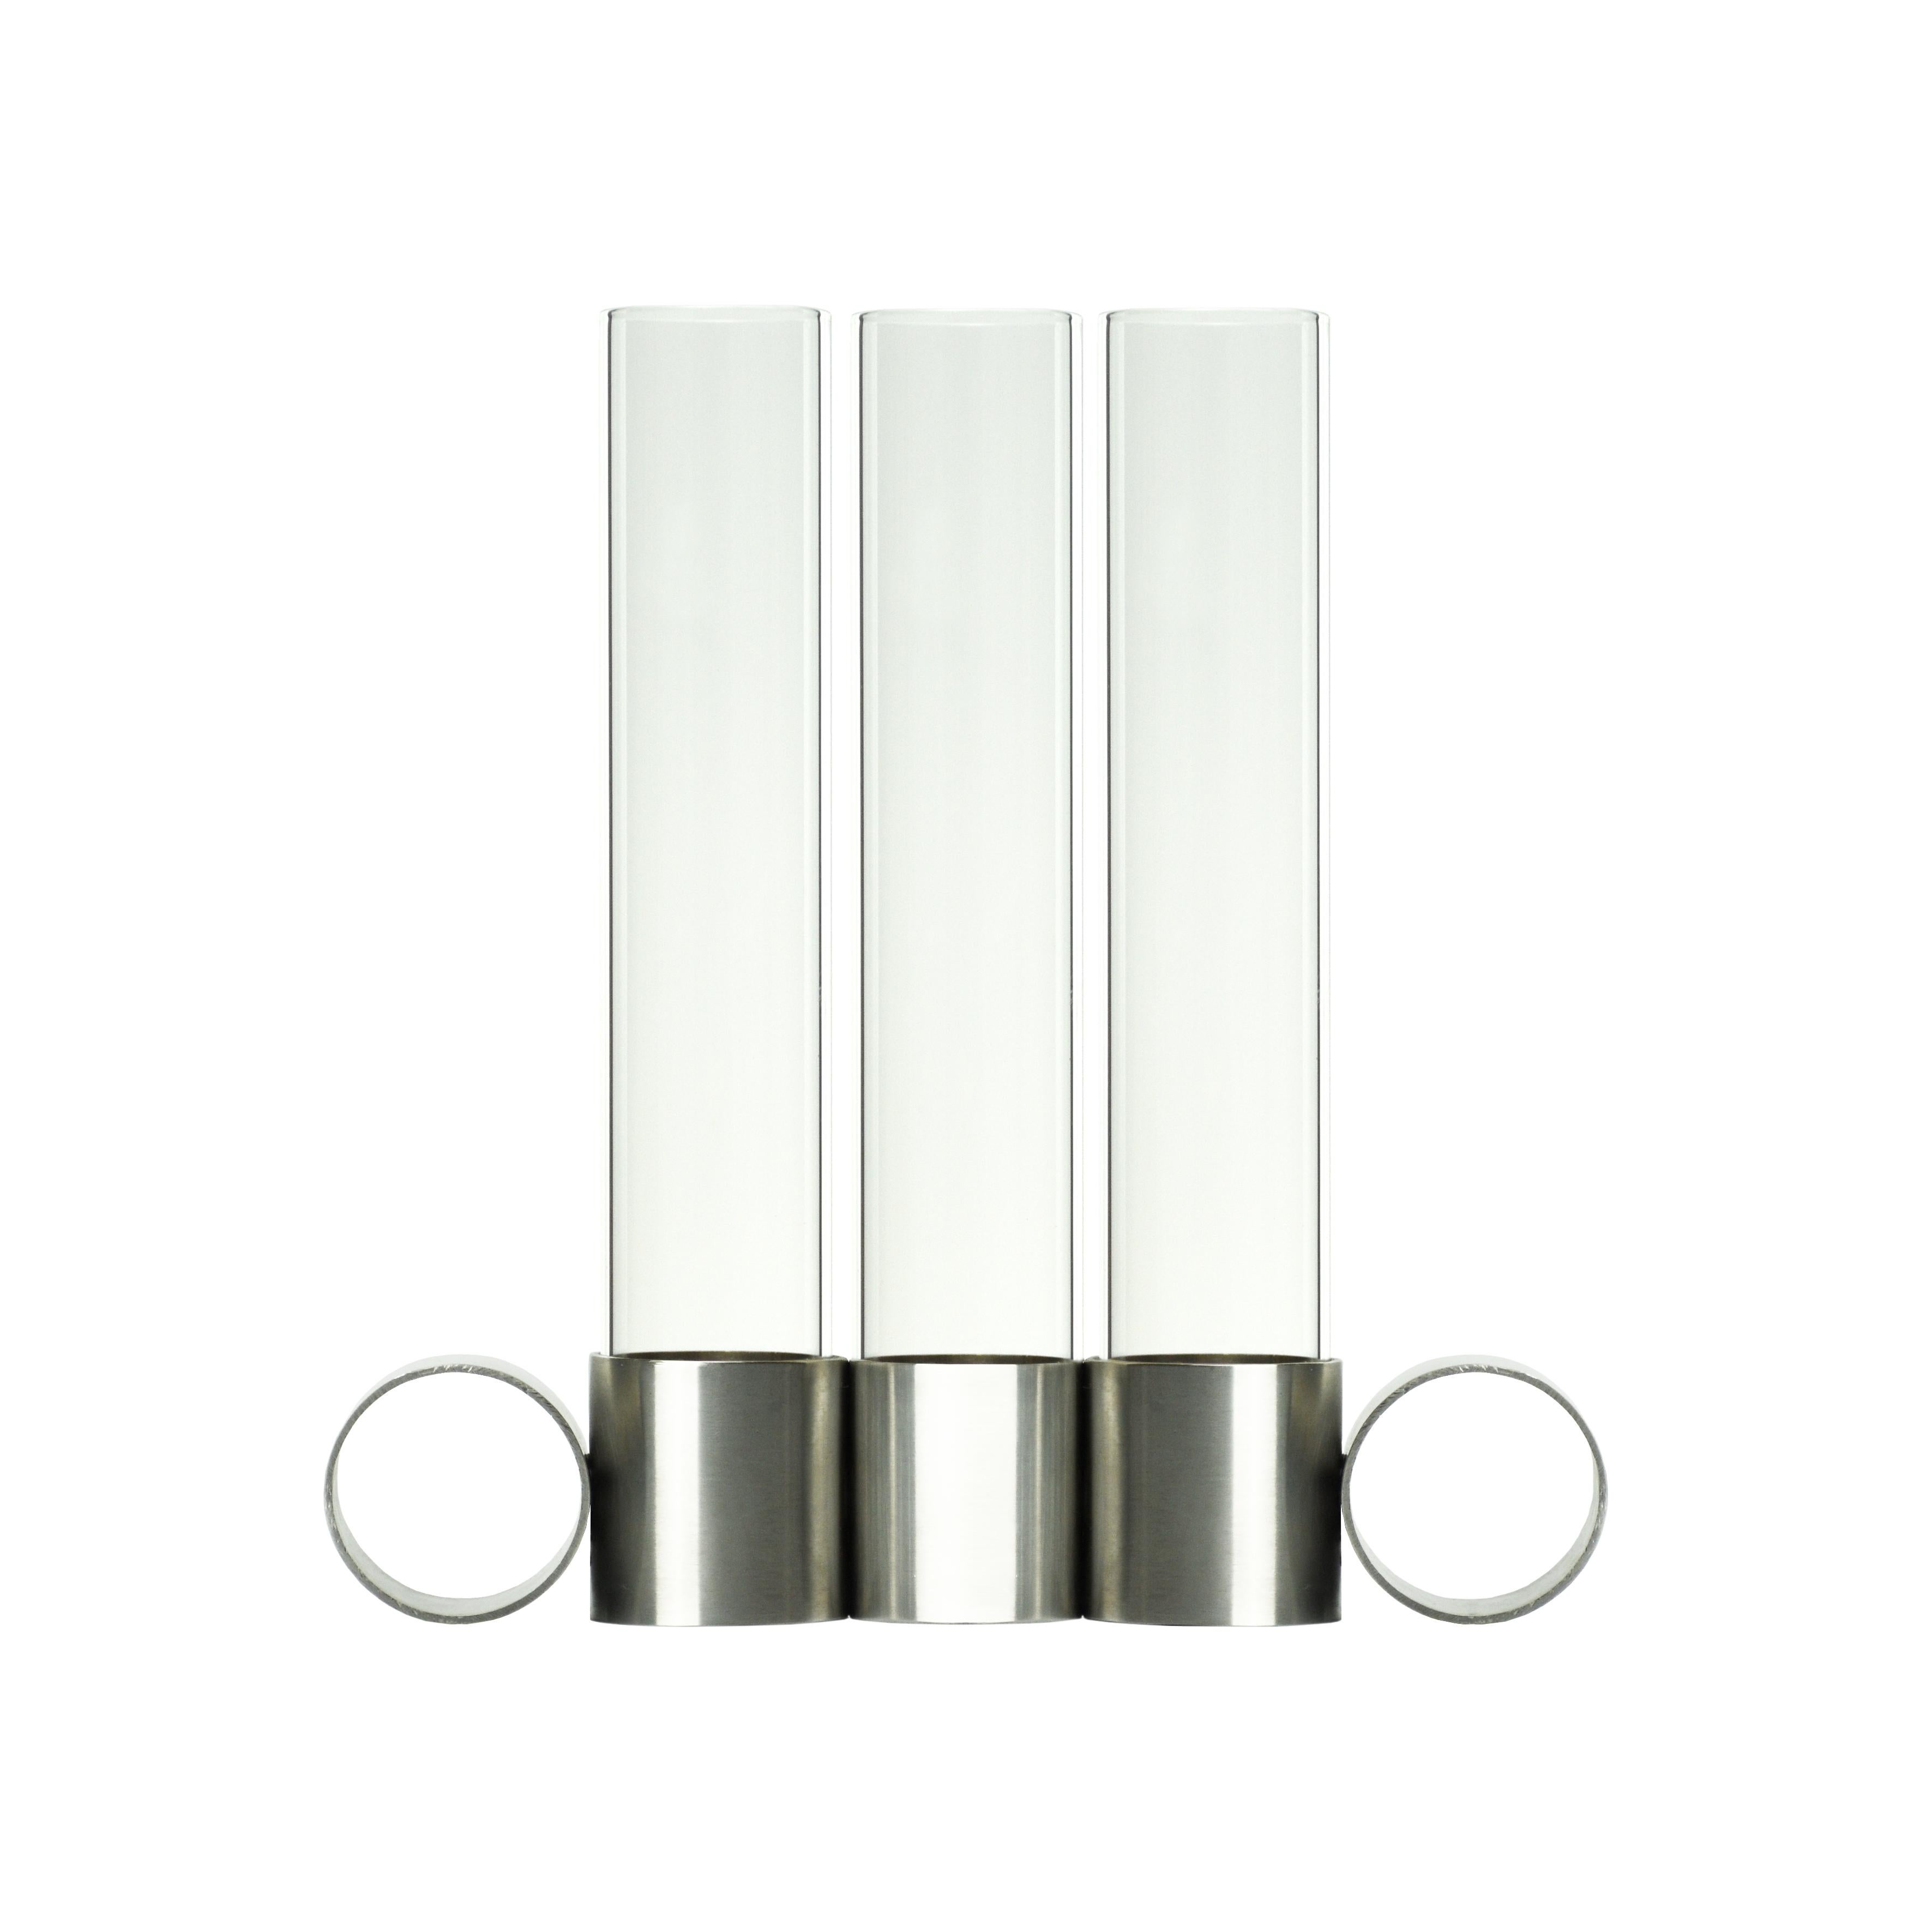 Tempio del Tempo 3 candleholder by Coki Barbieri
Dimensions: W 20 x D 4 x H 20 cm.
Materials: stainless steel (made in Italy), borosilicate glass (made in Italy), soy wax or olive oil wax candle and TPE rubber.

FEATURES
7 divided